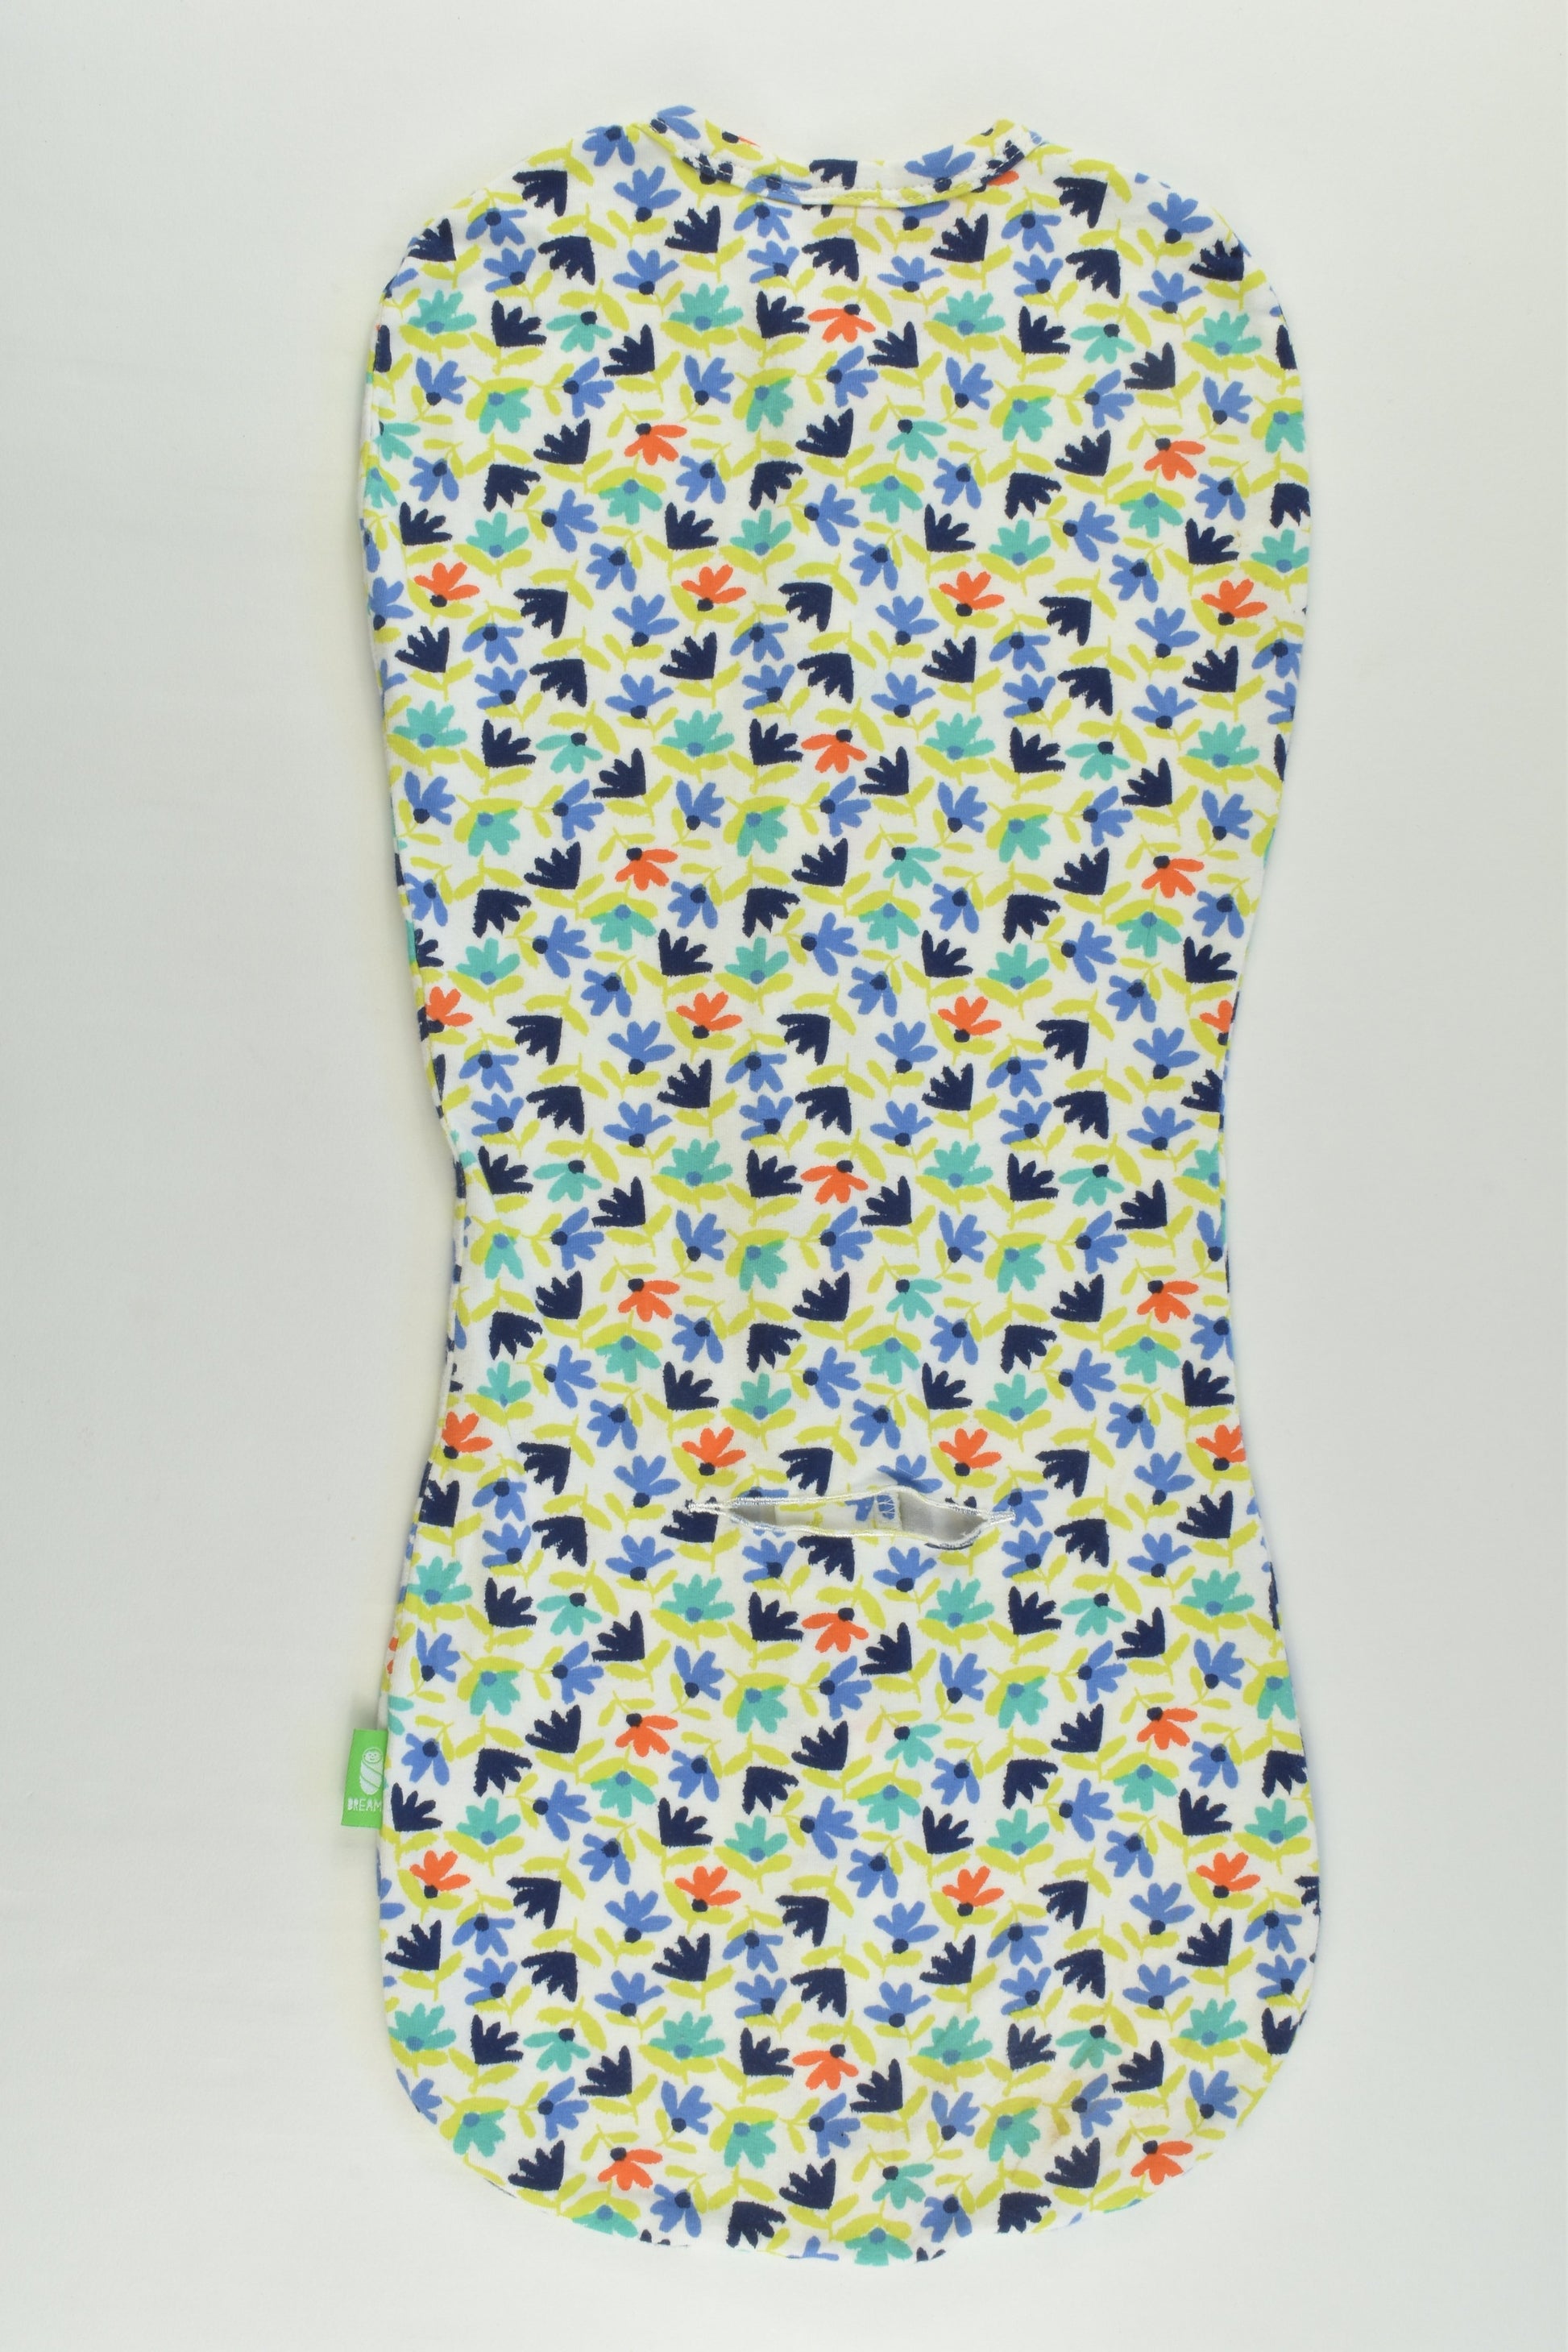 Dreame Swaddle Pod Size approx 000 (6-9 kg) Floral Sleeping Bag Swaddle